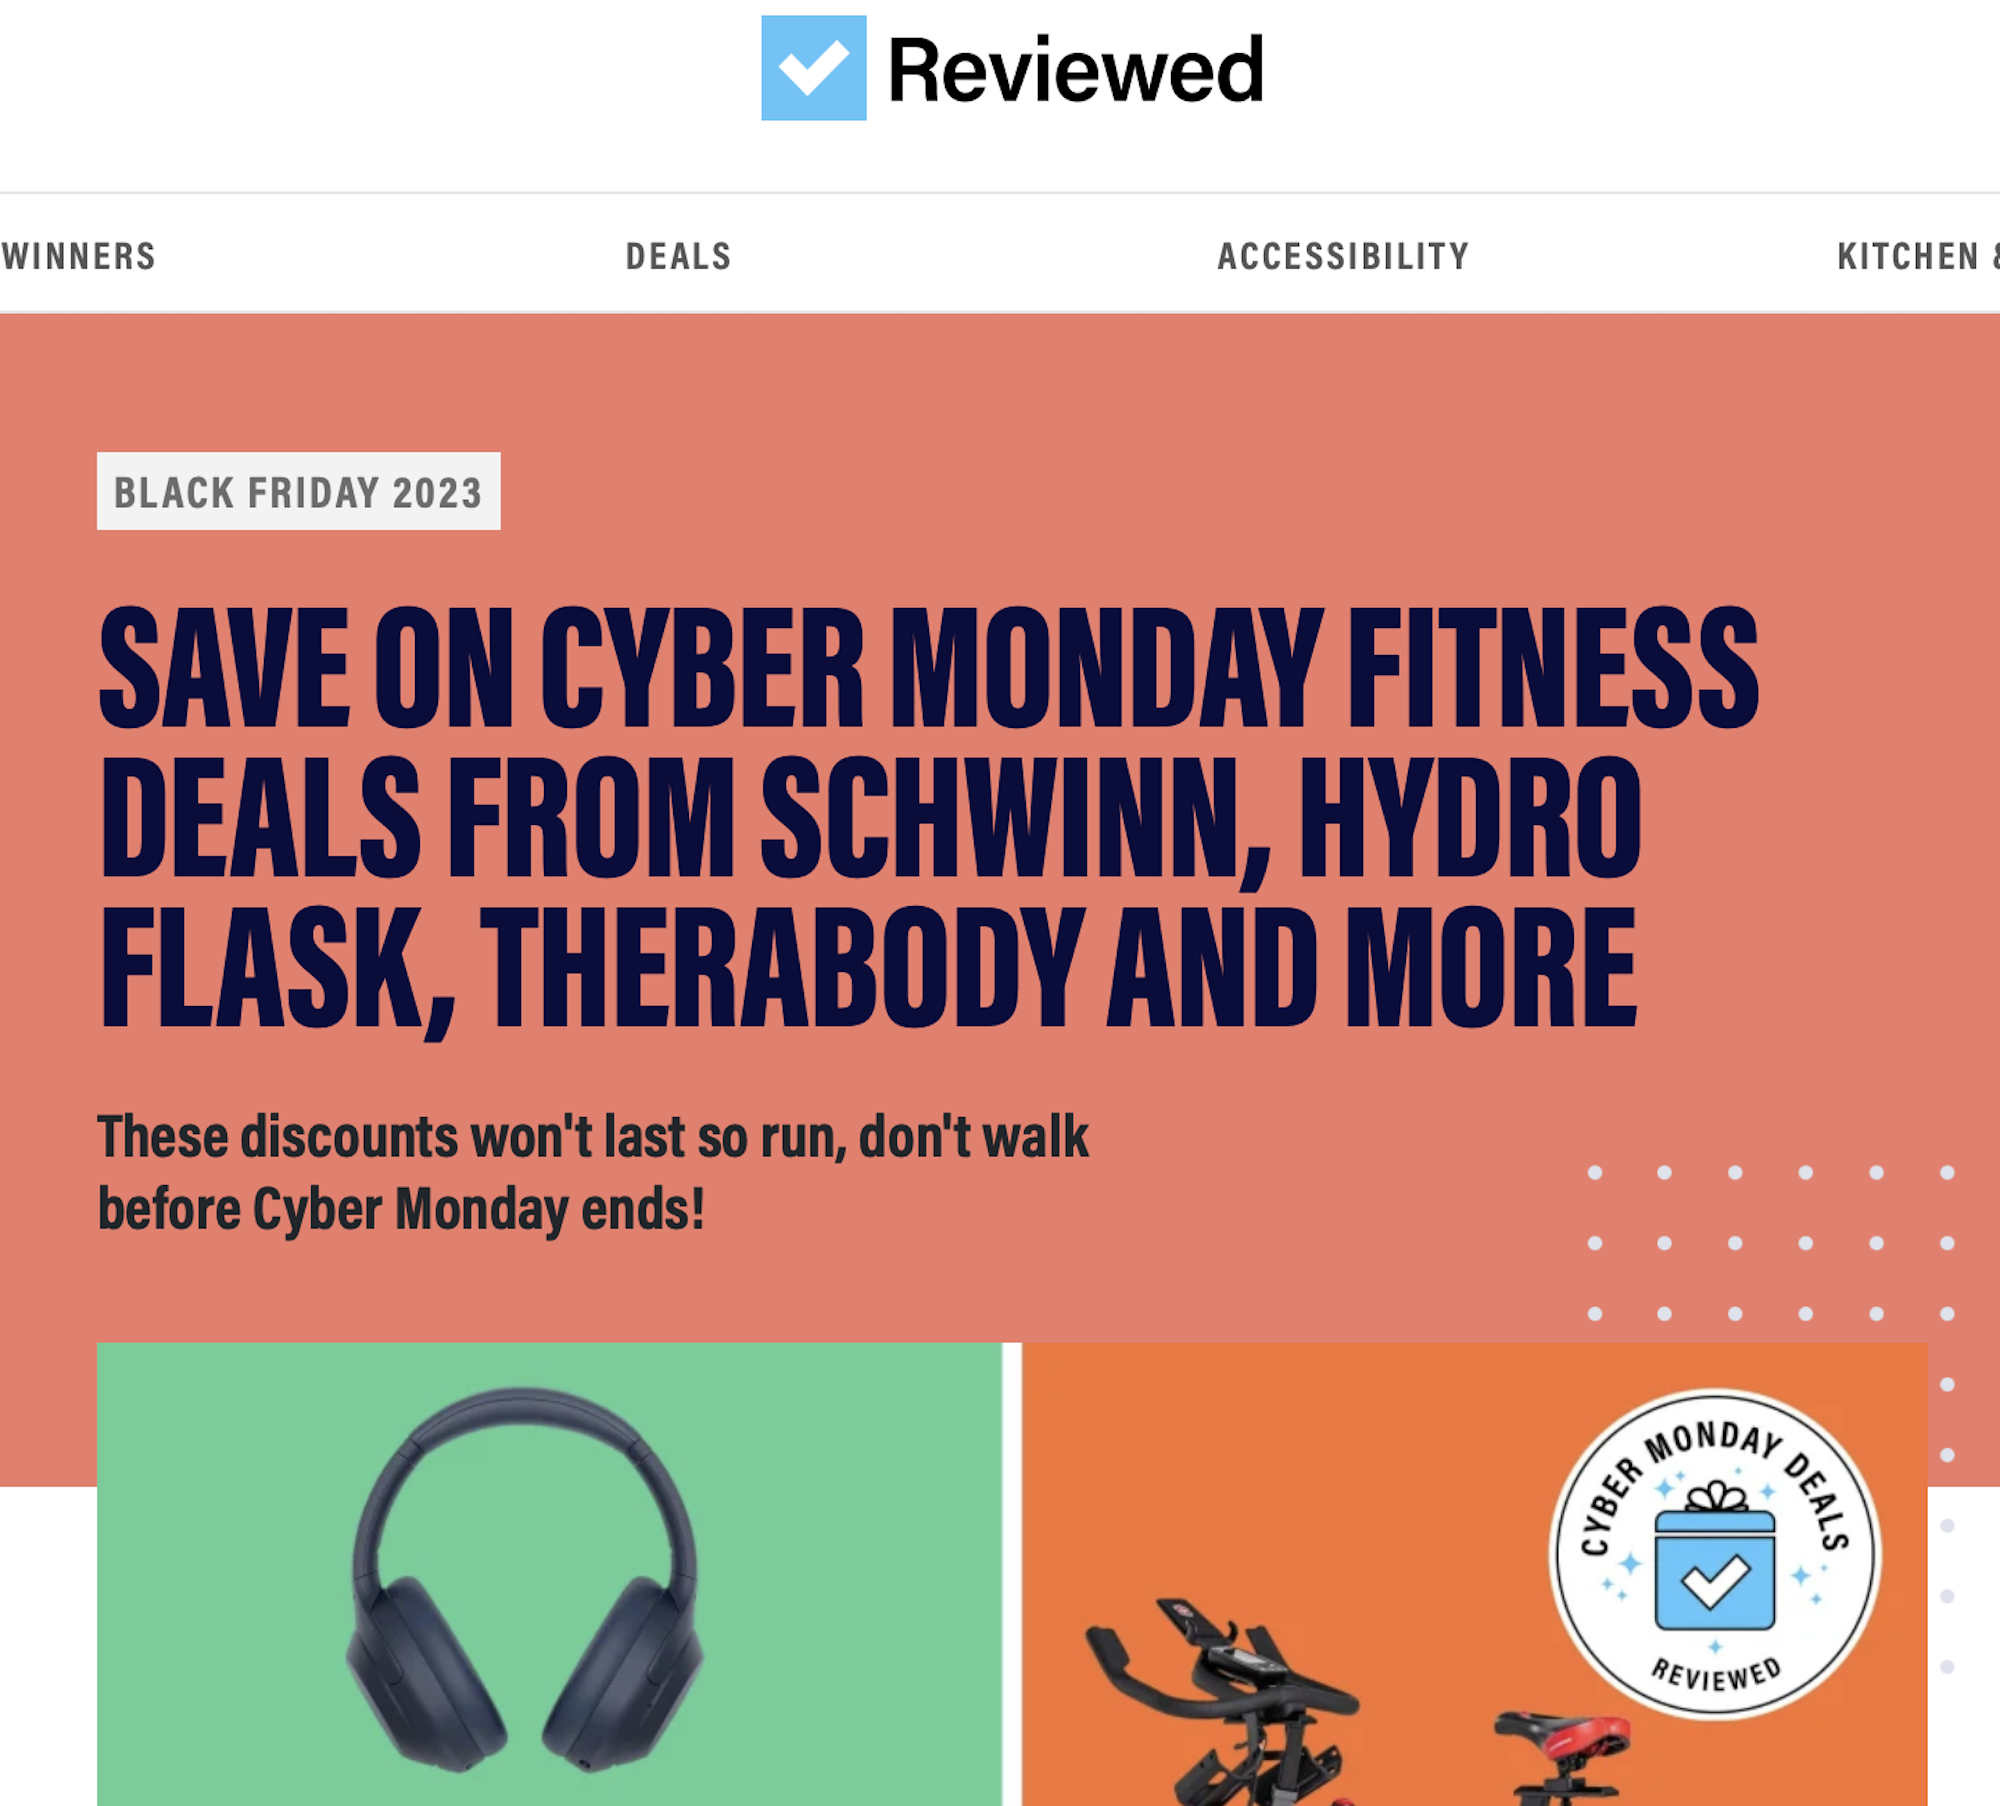 A screenshot of a USA Today Reviewed headline that reads:
Black Friday 2023
Save on Cyber Monday fitness deals from Schwinn, Hydro Flask, Therabody and more
These discounts won't last so run, don't walk before Cyber Monday ends!